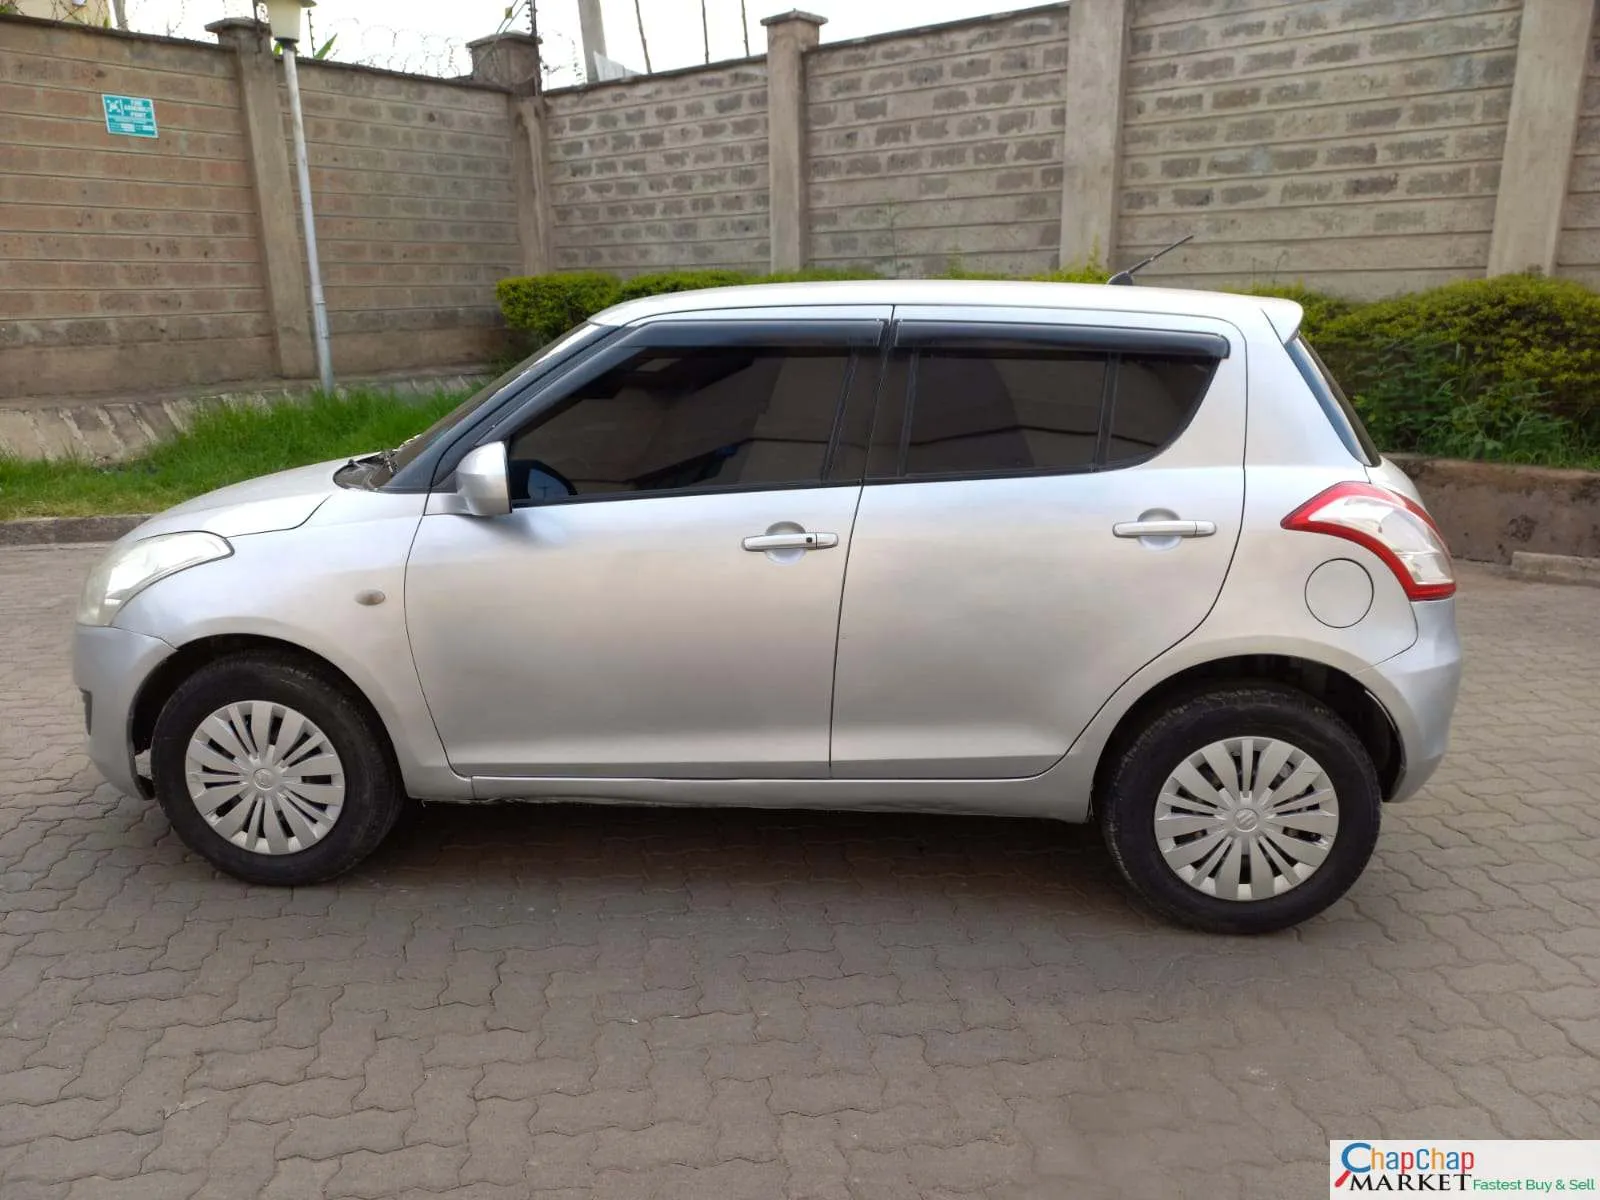 [Sub-categories]-Suzuki Swift for sale in Kenya You Pay 30% Deposit Trade in OK Hire Purchase Installments 9